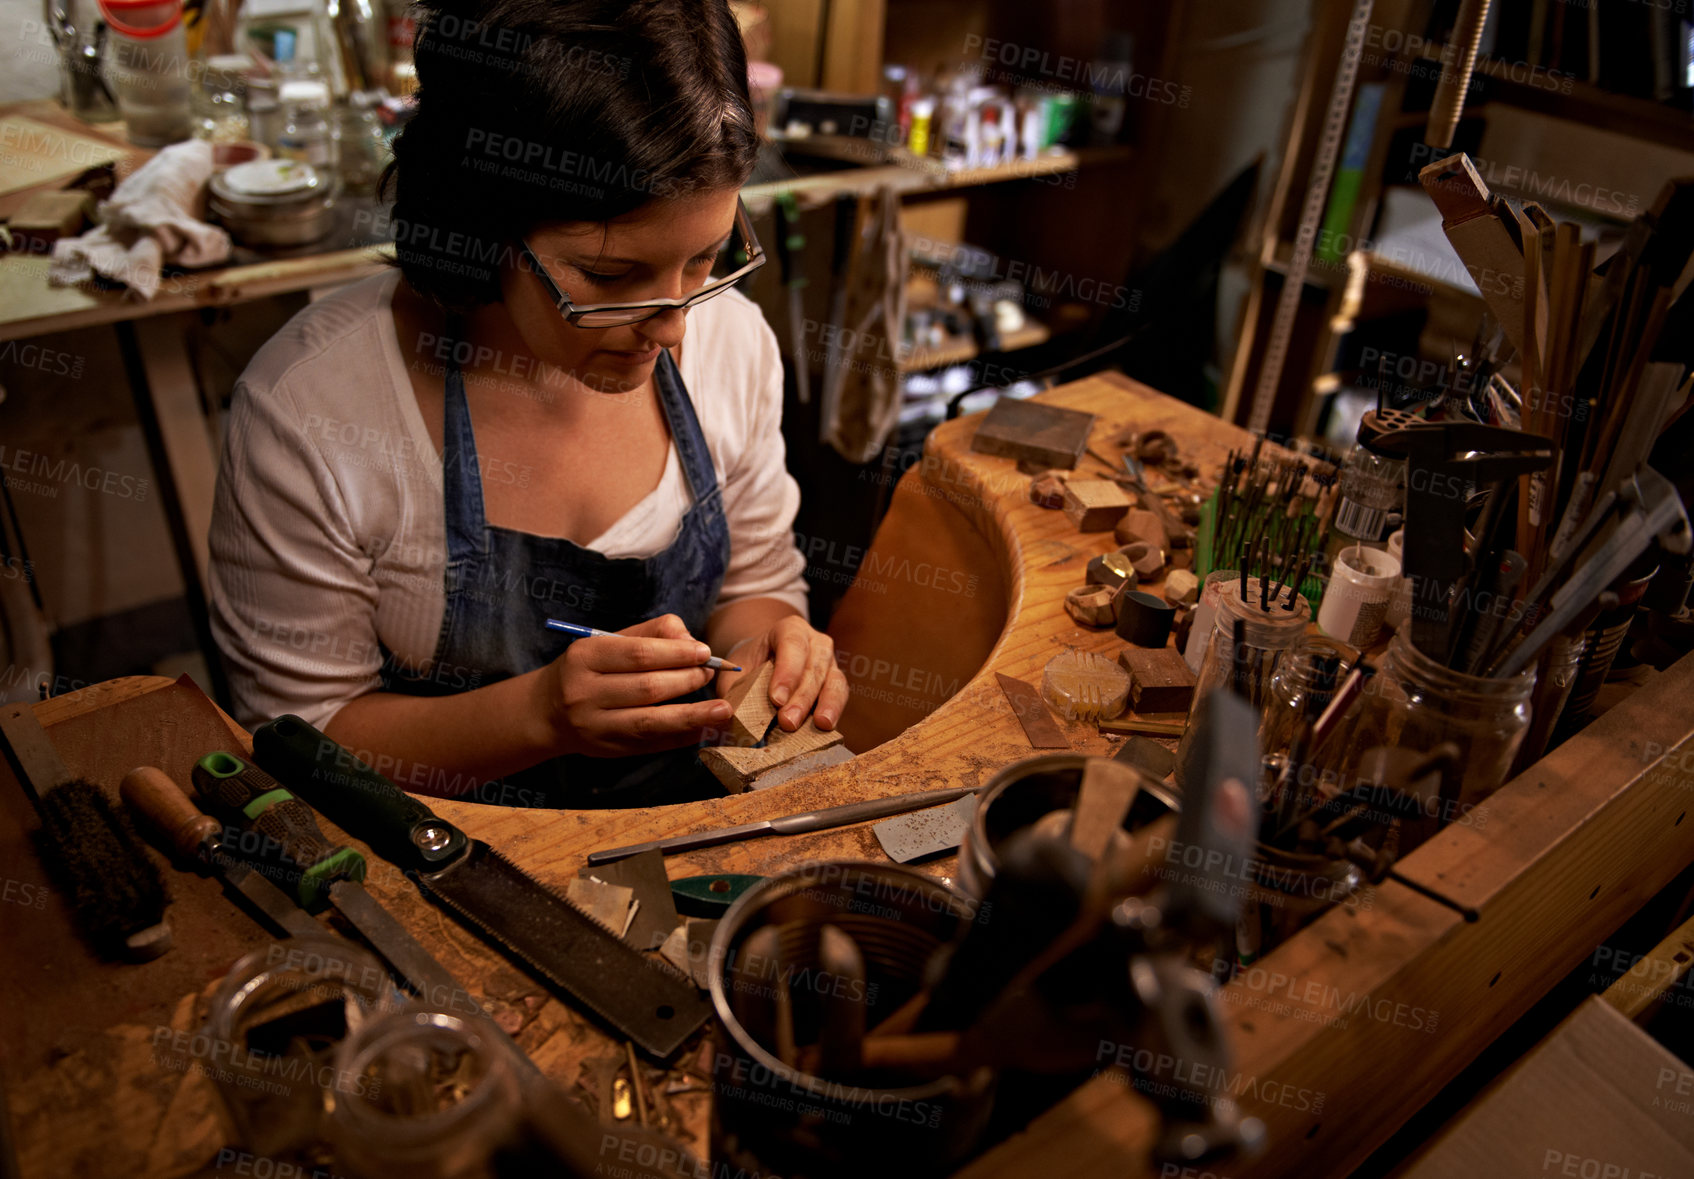 Buy stock photo Woodworking, tools and artist in workshop with creative project or sculpture on table at night. Artisan, carpenter and woman with talent for creativity in dark studio in process of carving wood